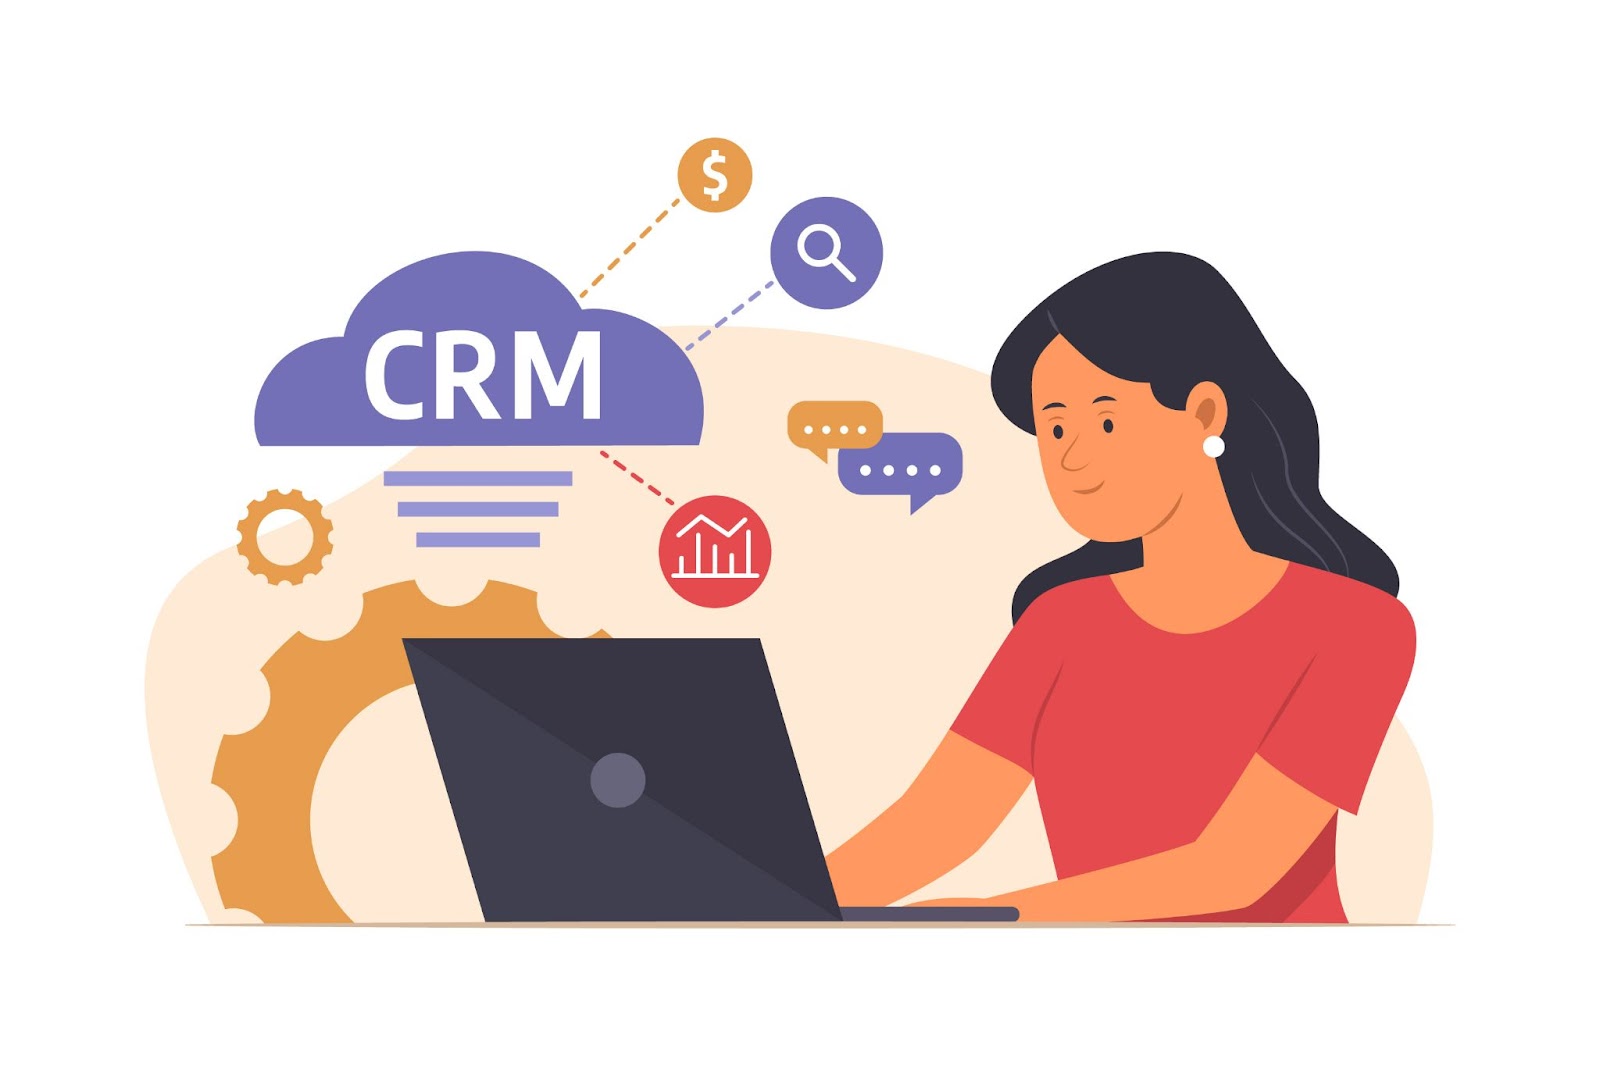 What is a CRM Software?